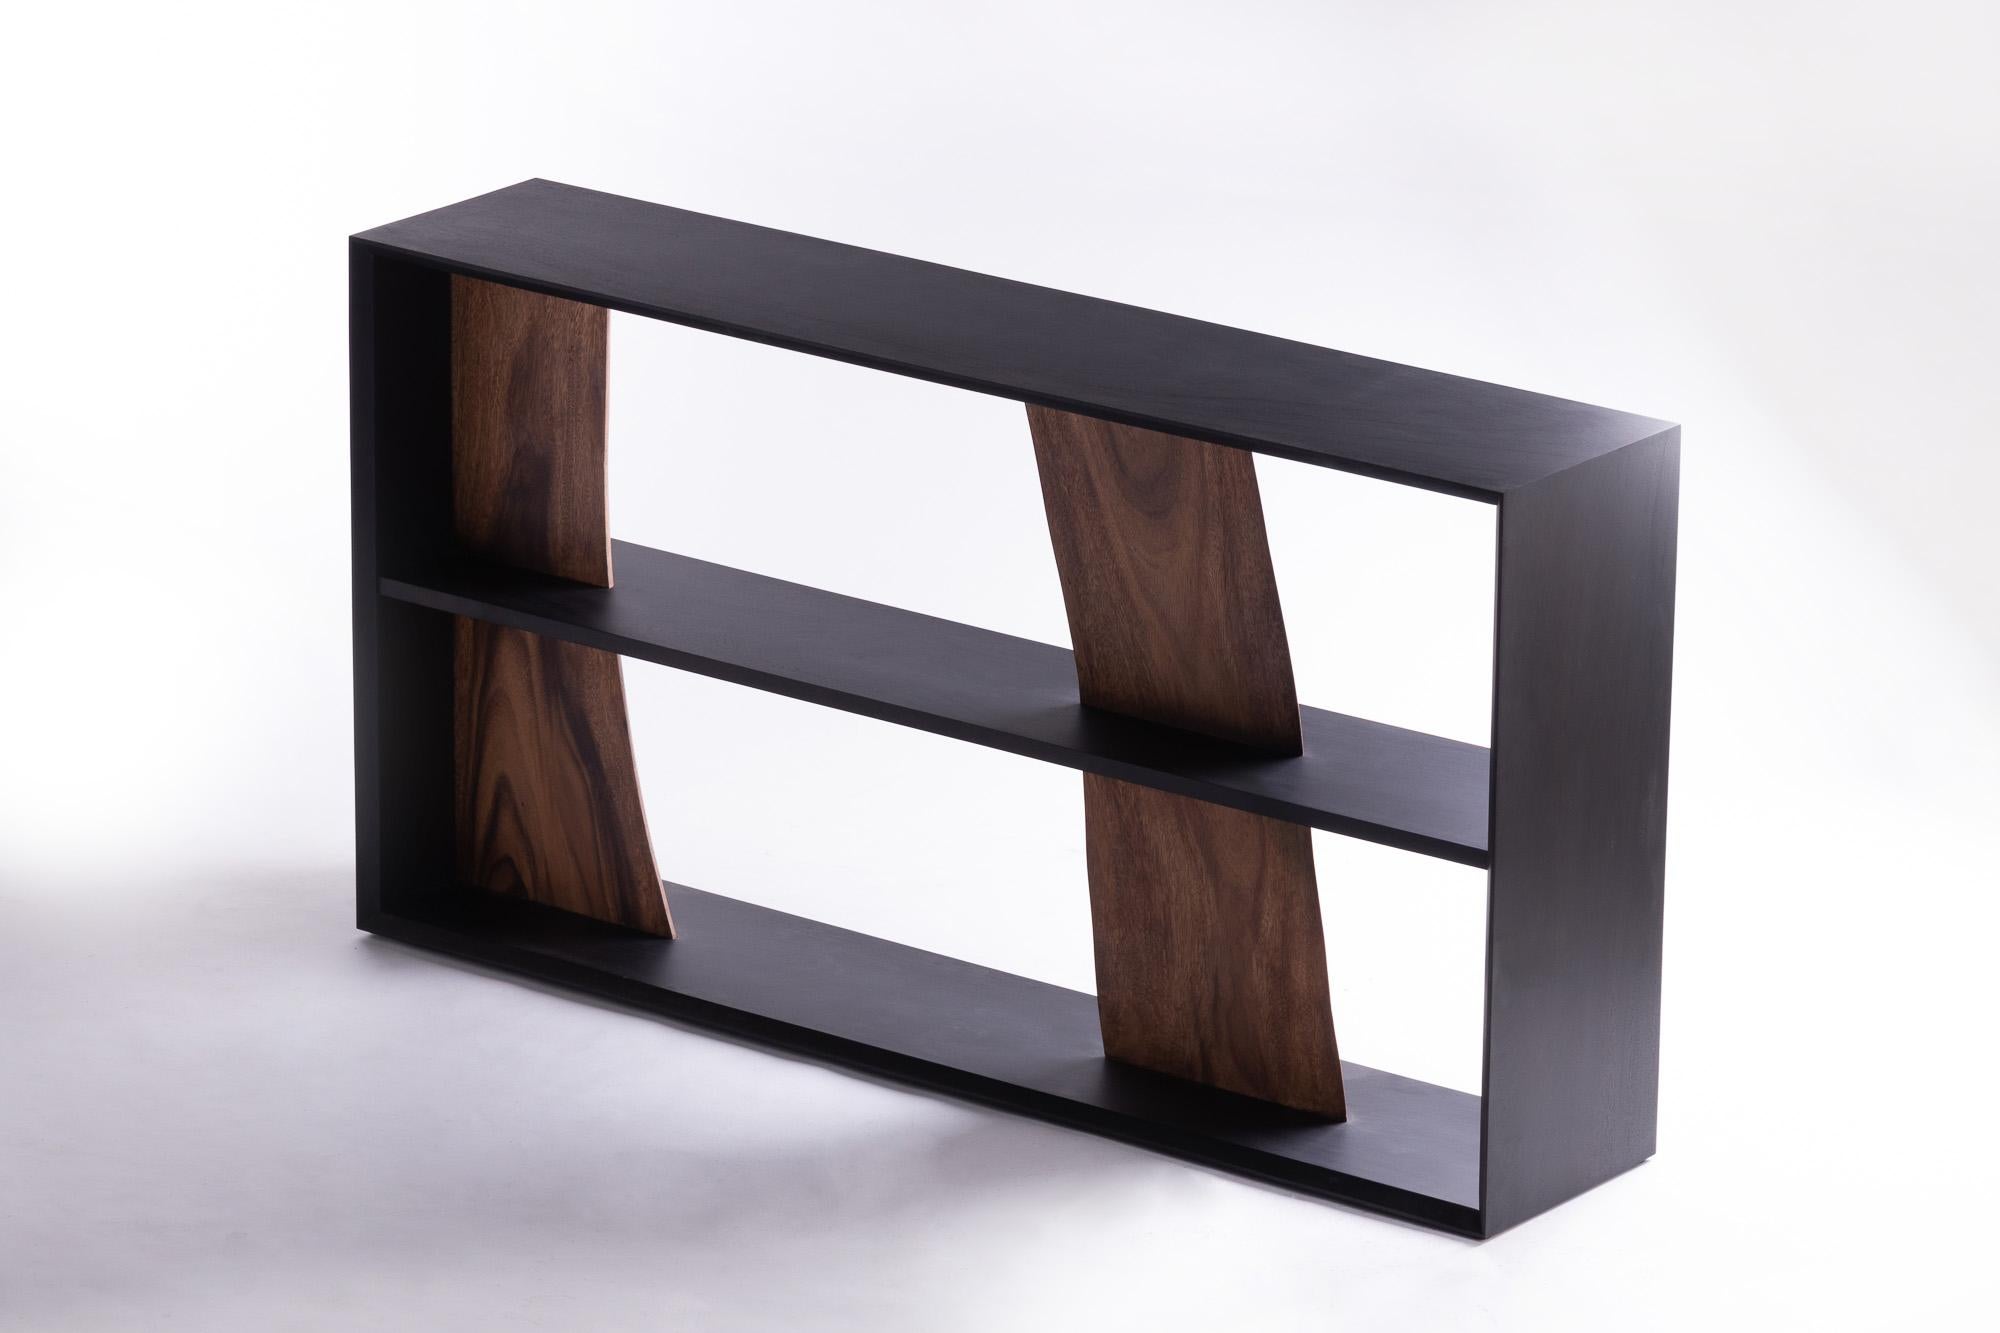 A great deal of time was spent considering the best way to cut wood without wasting its unique beauty. After careful consideration, this wood piece maintains its essential values by combining natural-shaped wood with simple pieces, creating a shelf